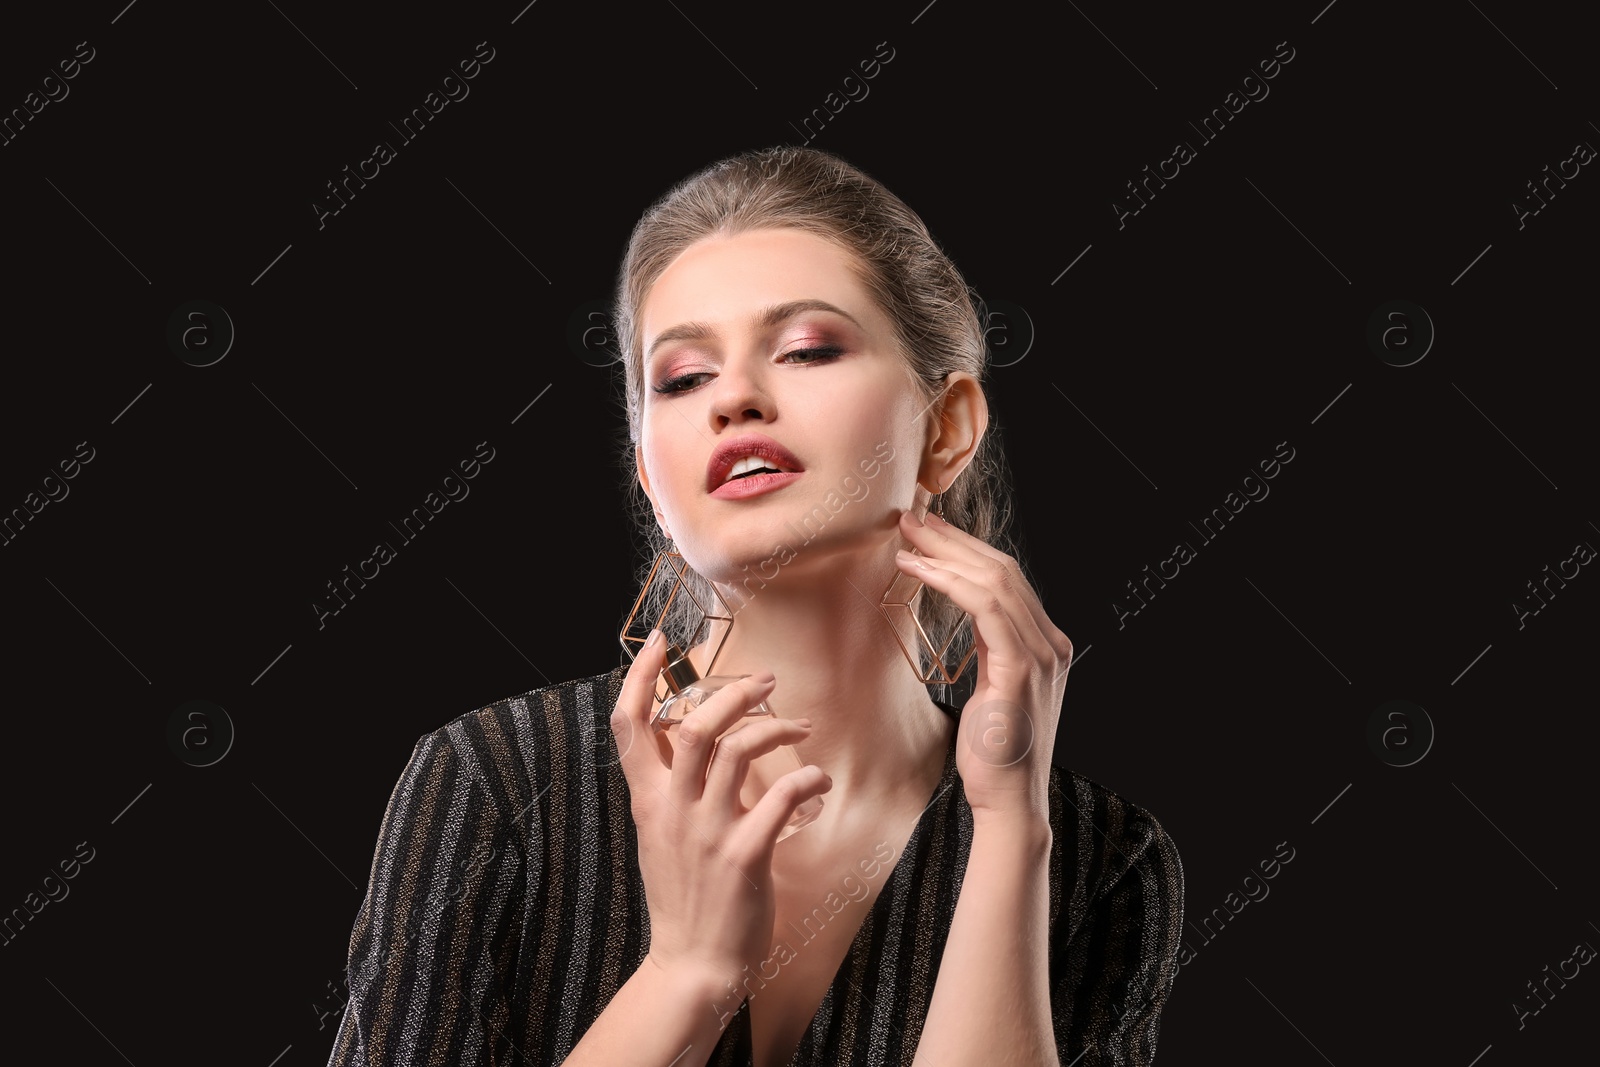 Photo of Beautiful young woman with bottle of perfume on black background